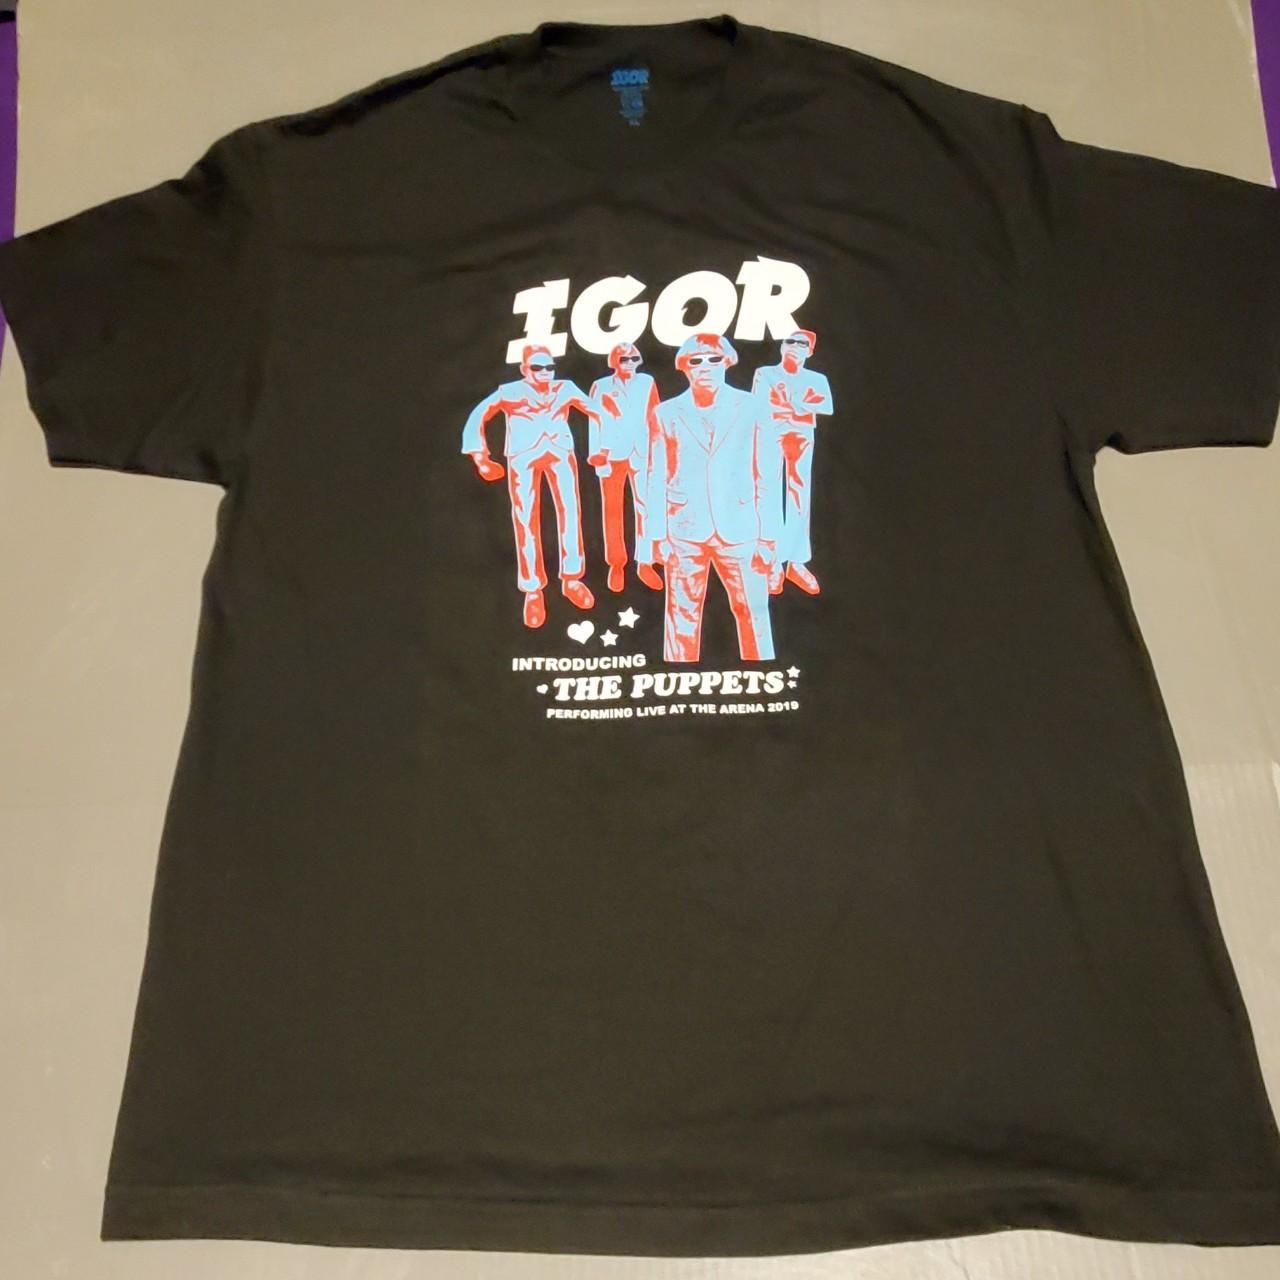 Found these pics of merch from the IGOR tour I went to over 2 years ago in  Toronto :3 : r/tylerthecreator